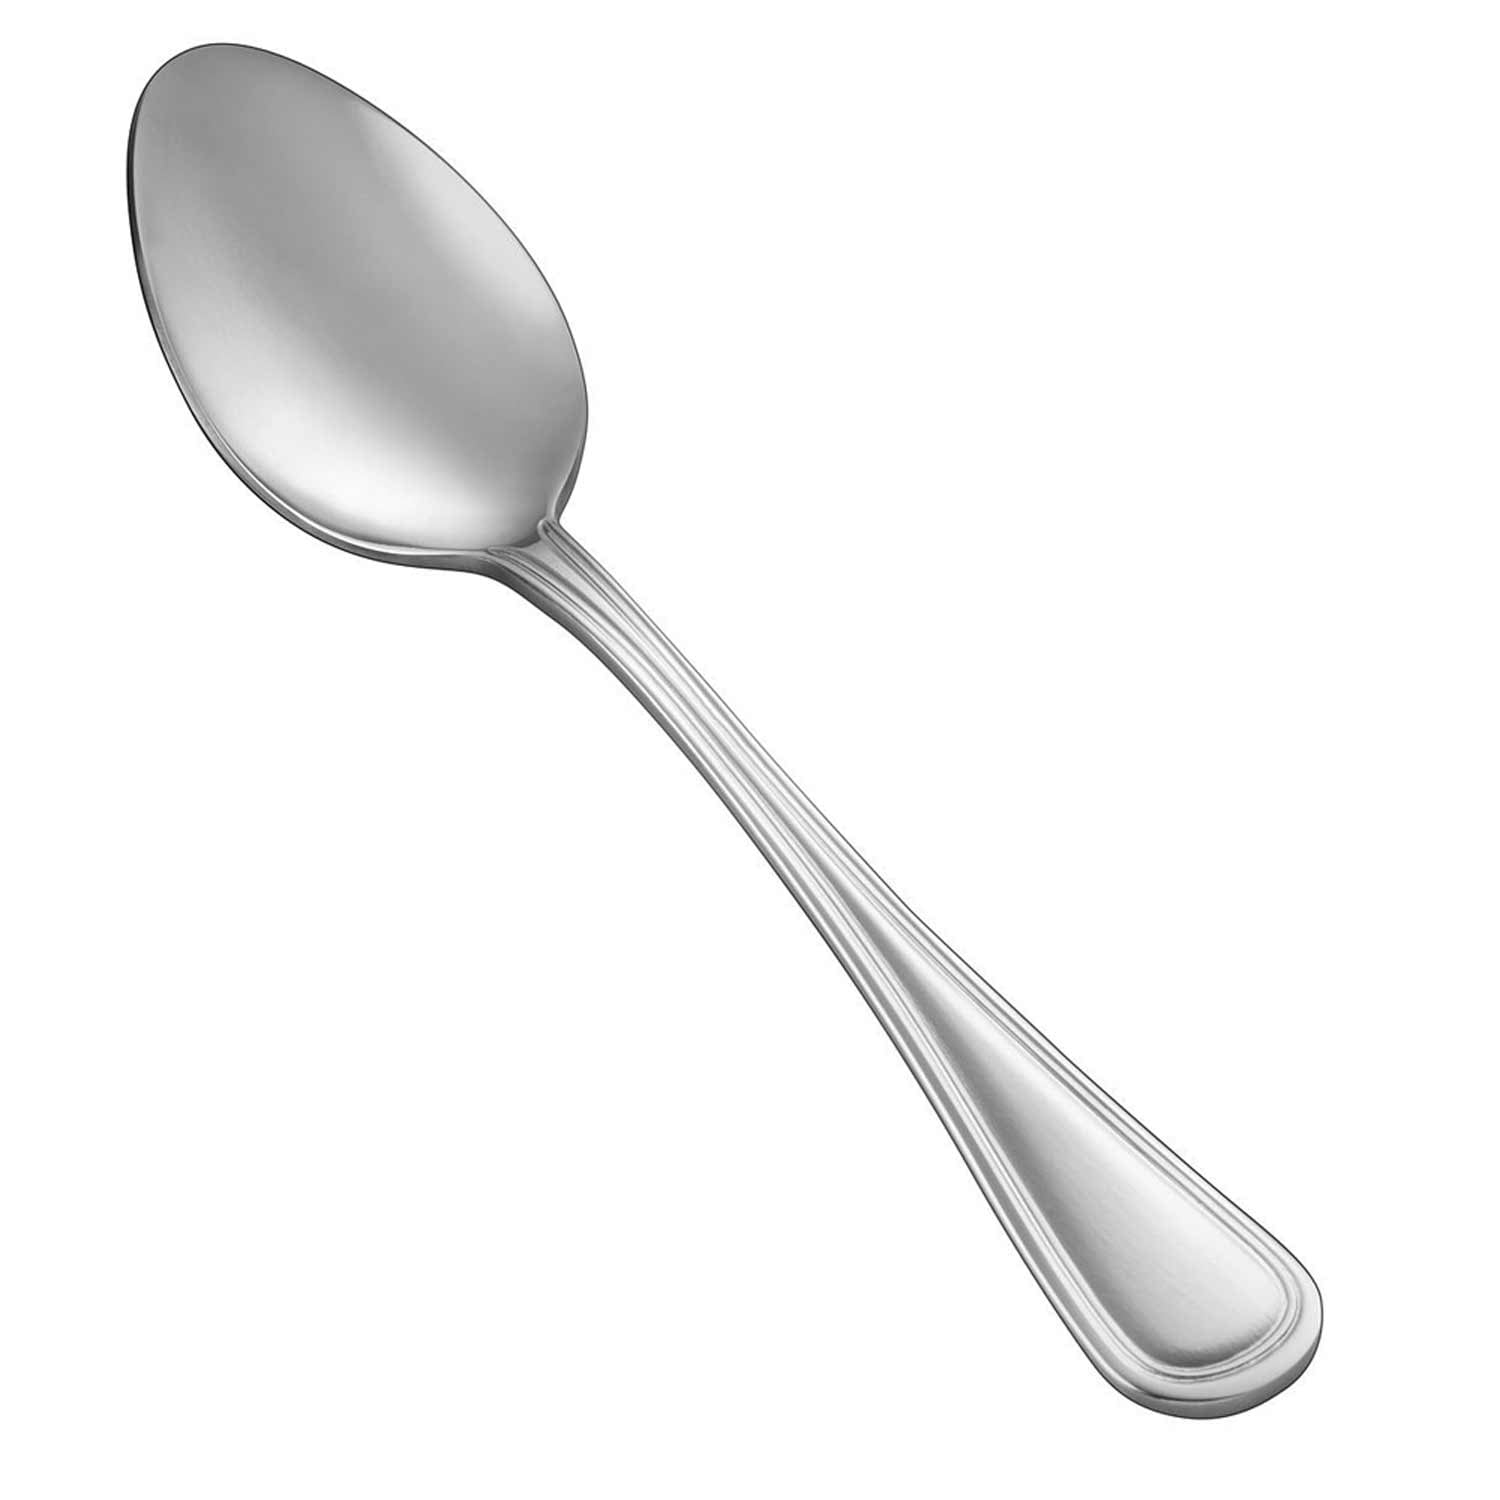 Eslite 12-Piece Tablespoons,Stainless Steel Extra-Large Dinner Spoons Set,7.8-Inches, Silver